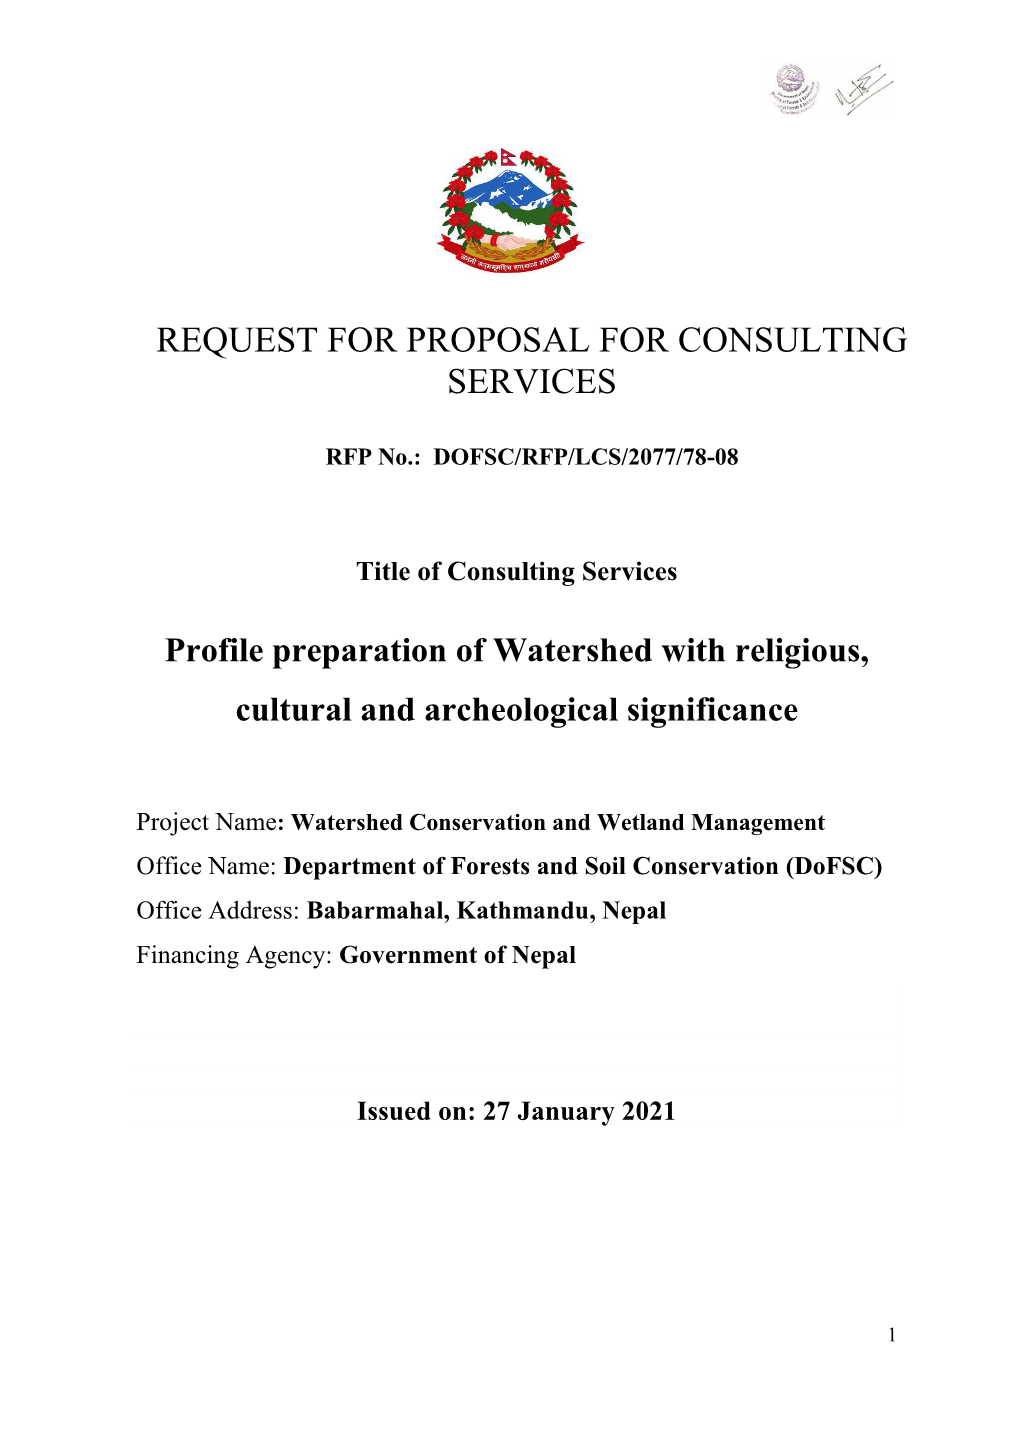 Request for Proposal for Consulting Services